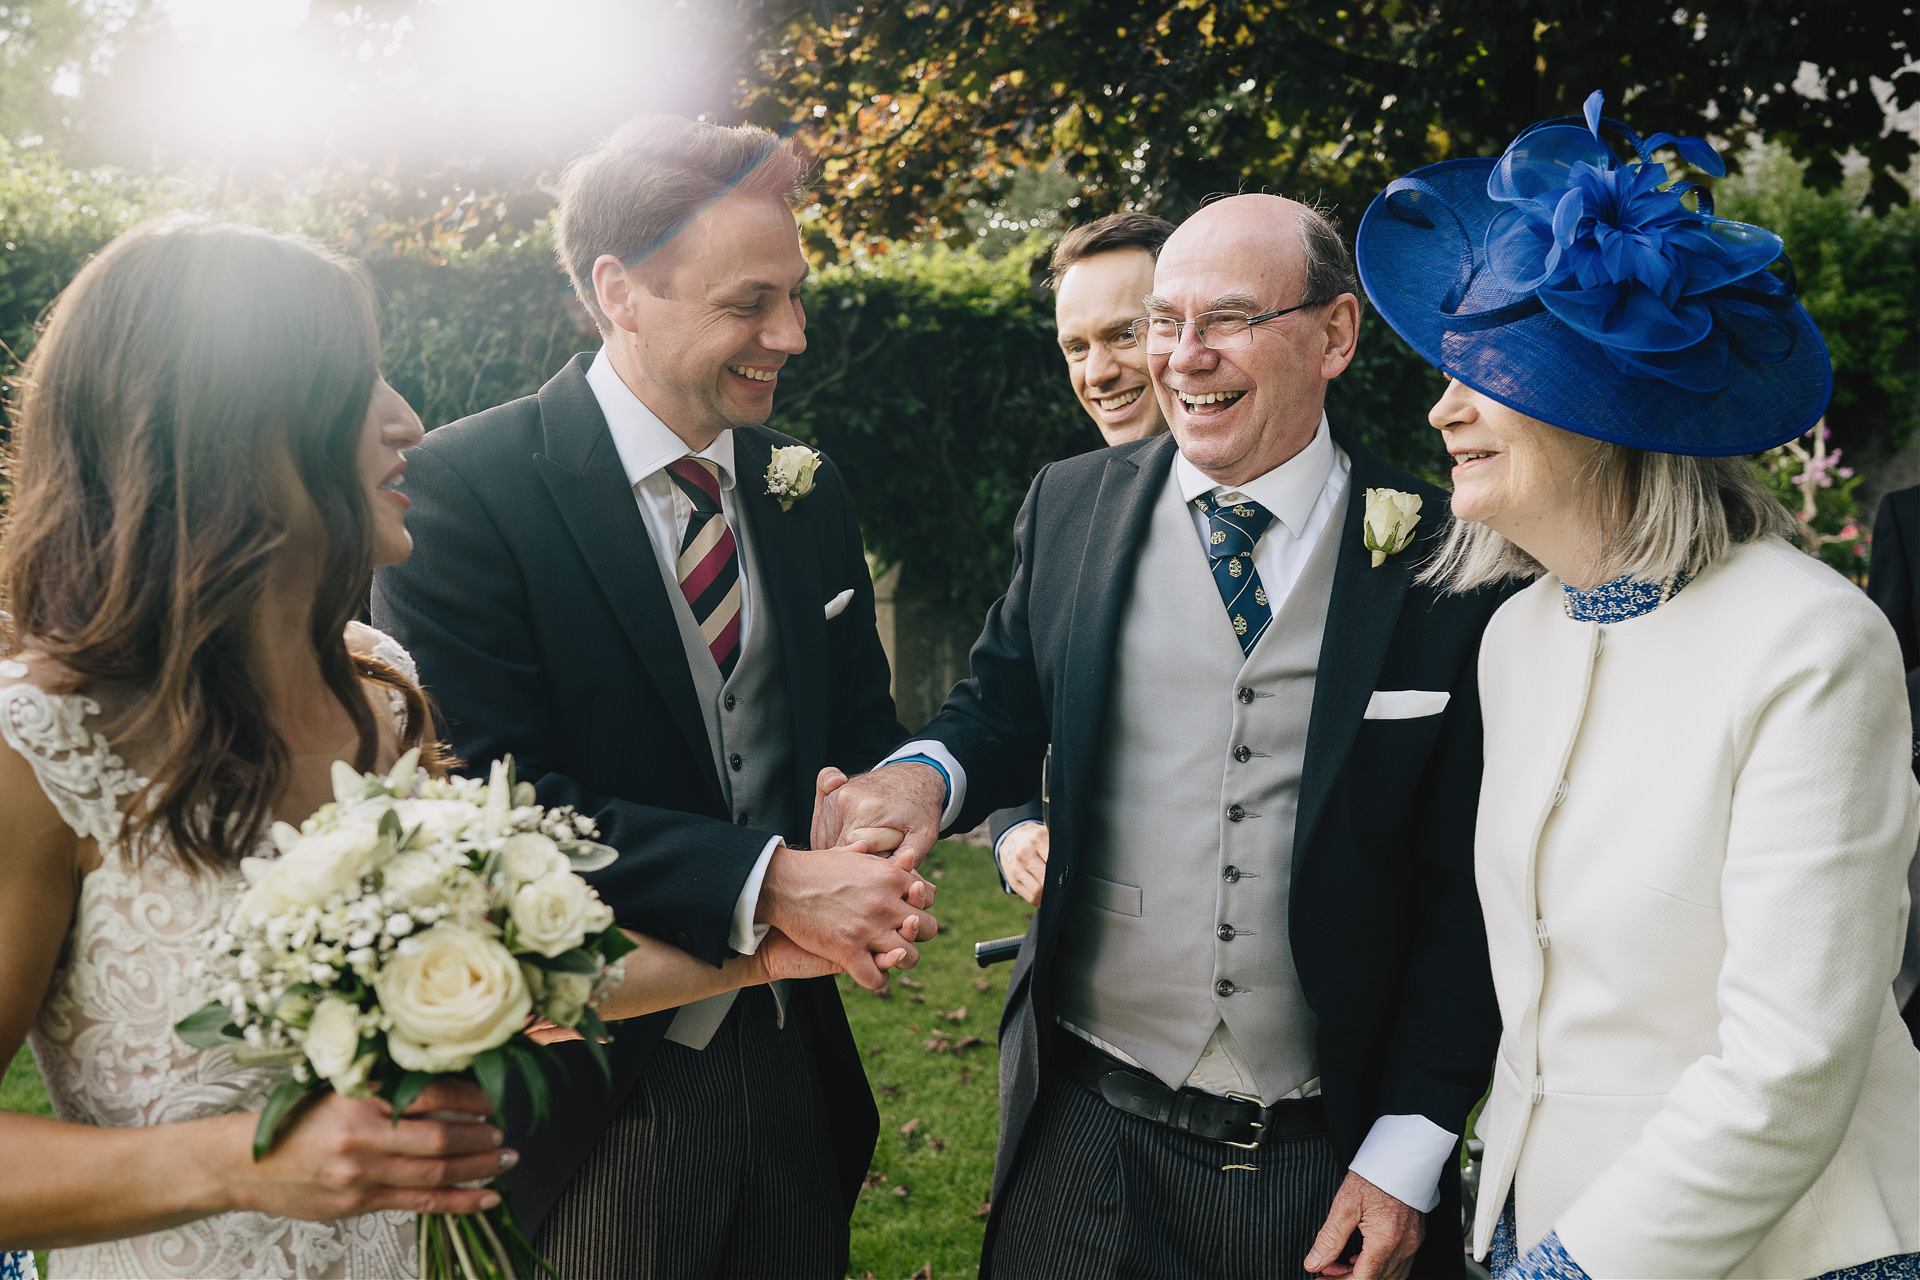 Wedding guests laughing together in a beautiful garden with sunlight behind